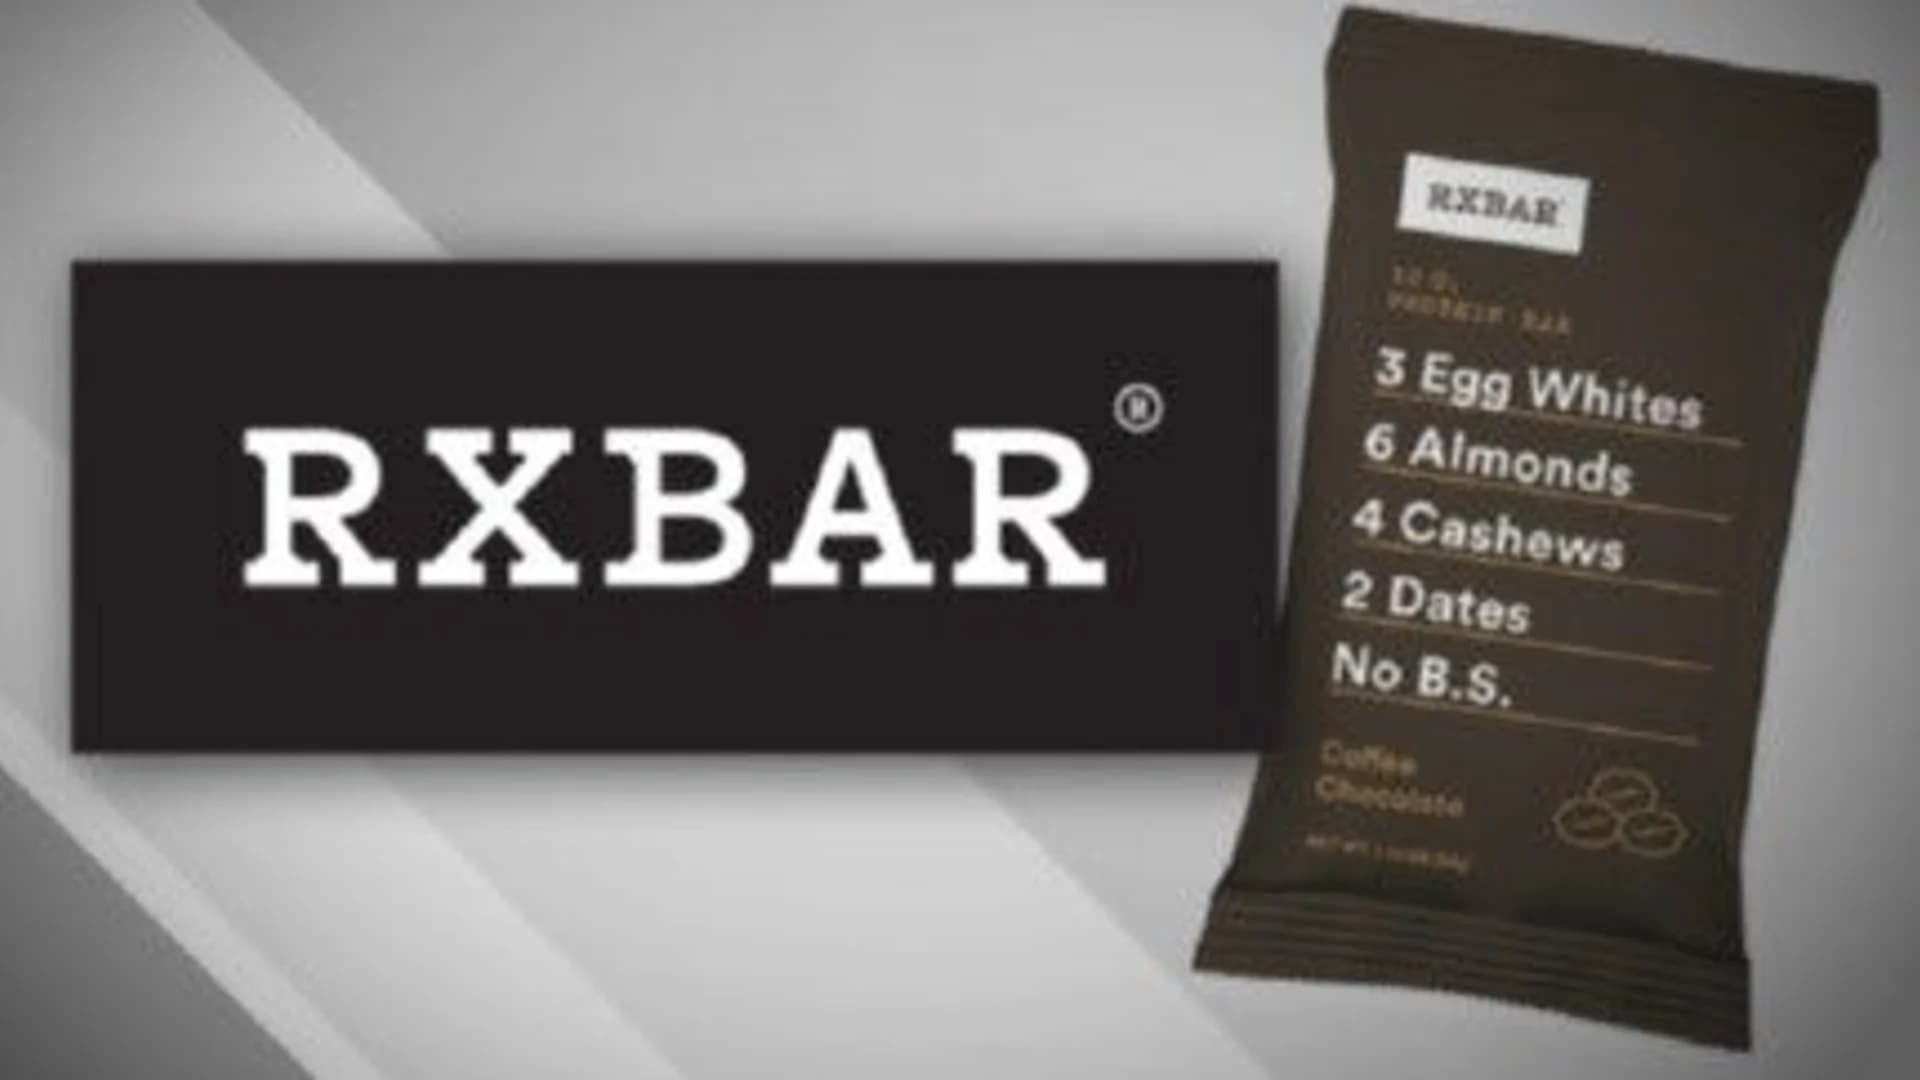 RxBar expands recall due to potential undeclared peanut allergen